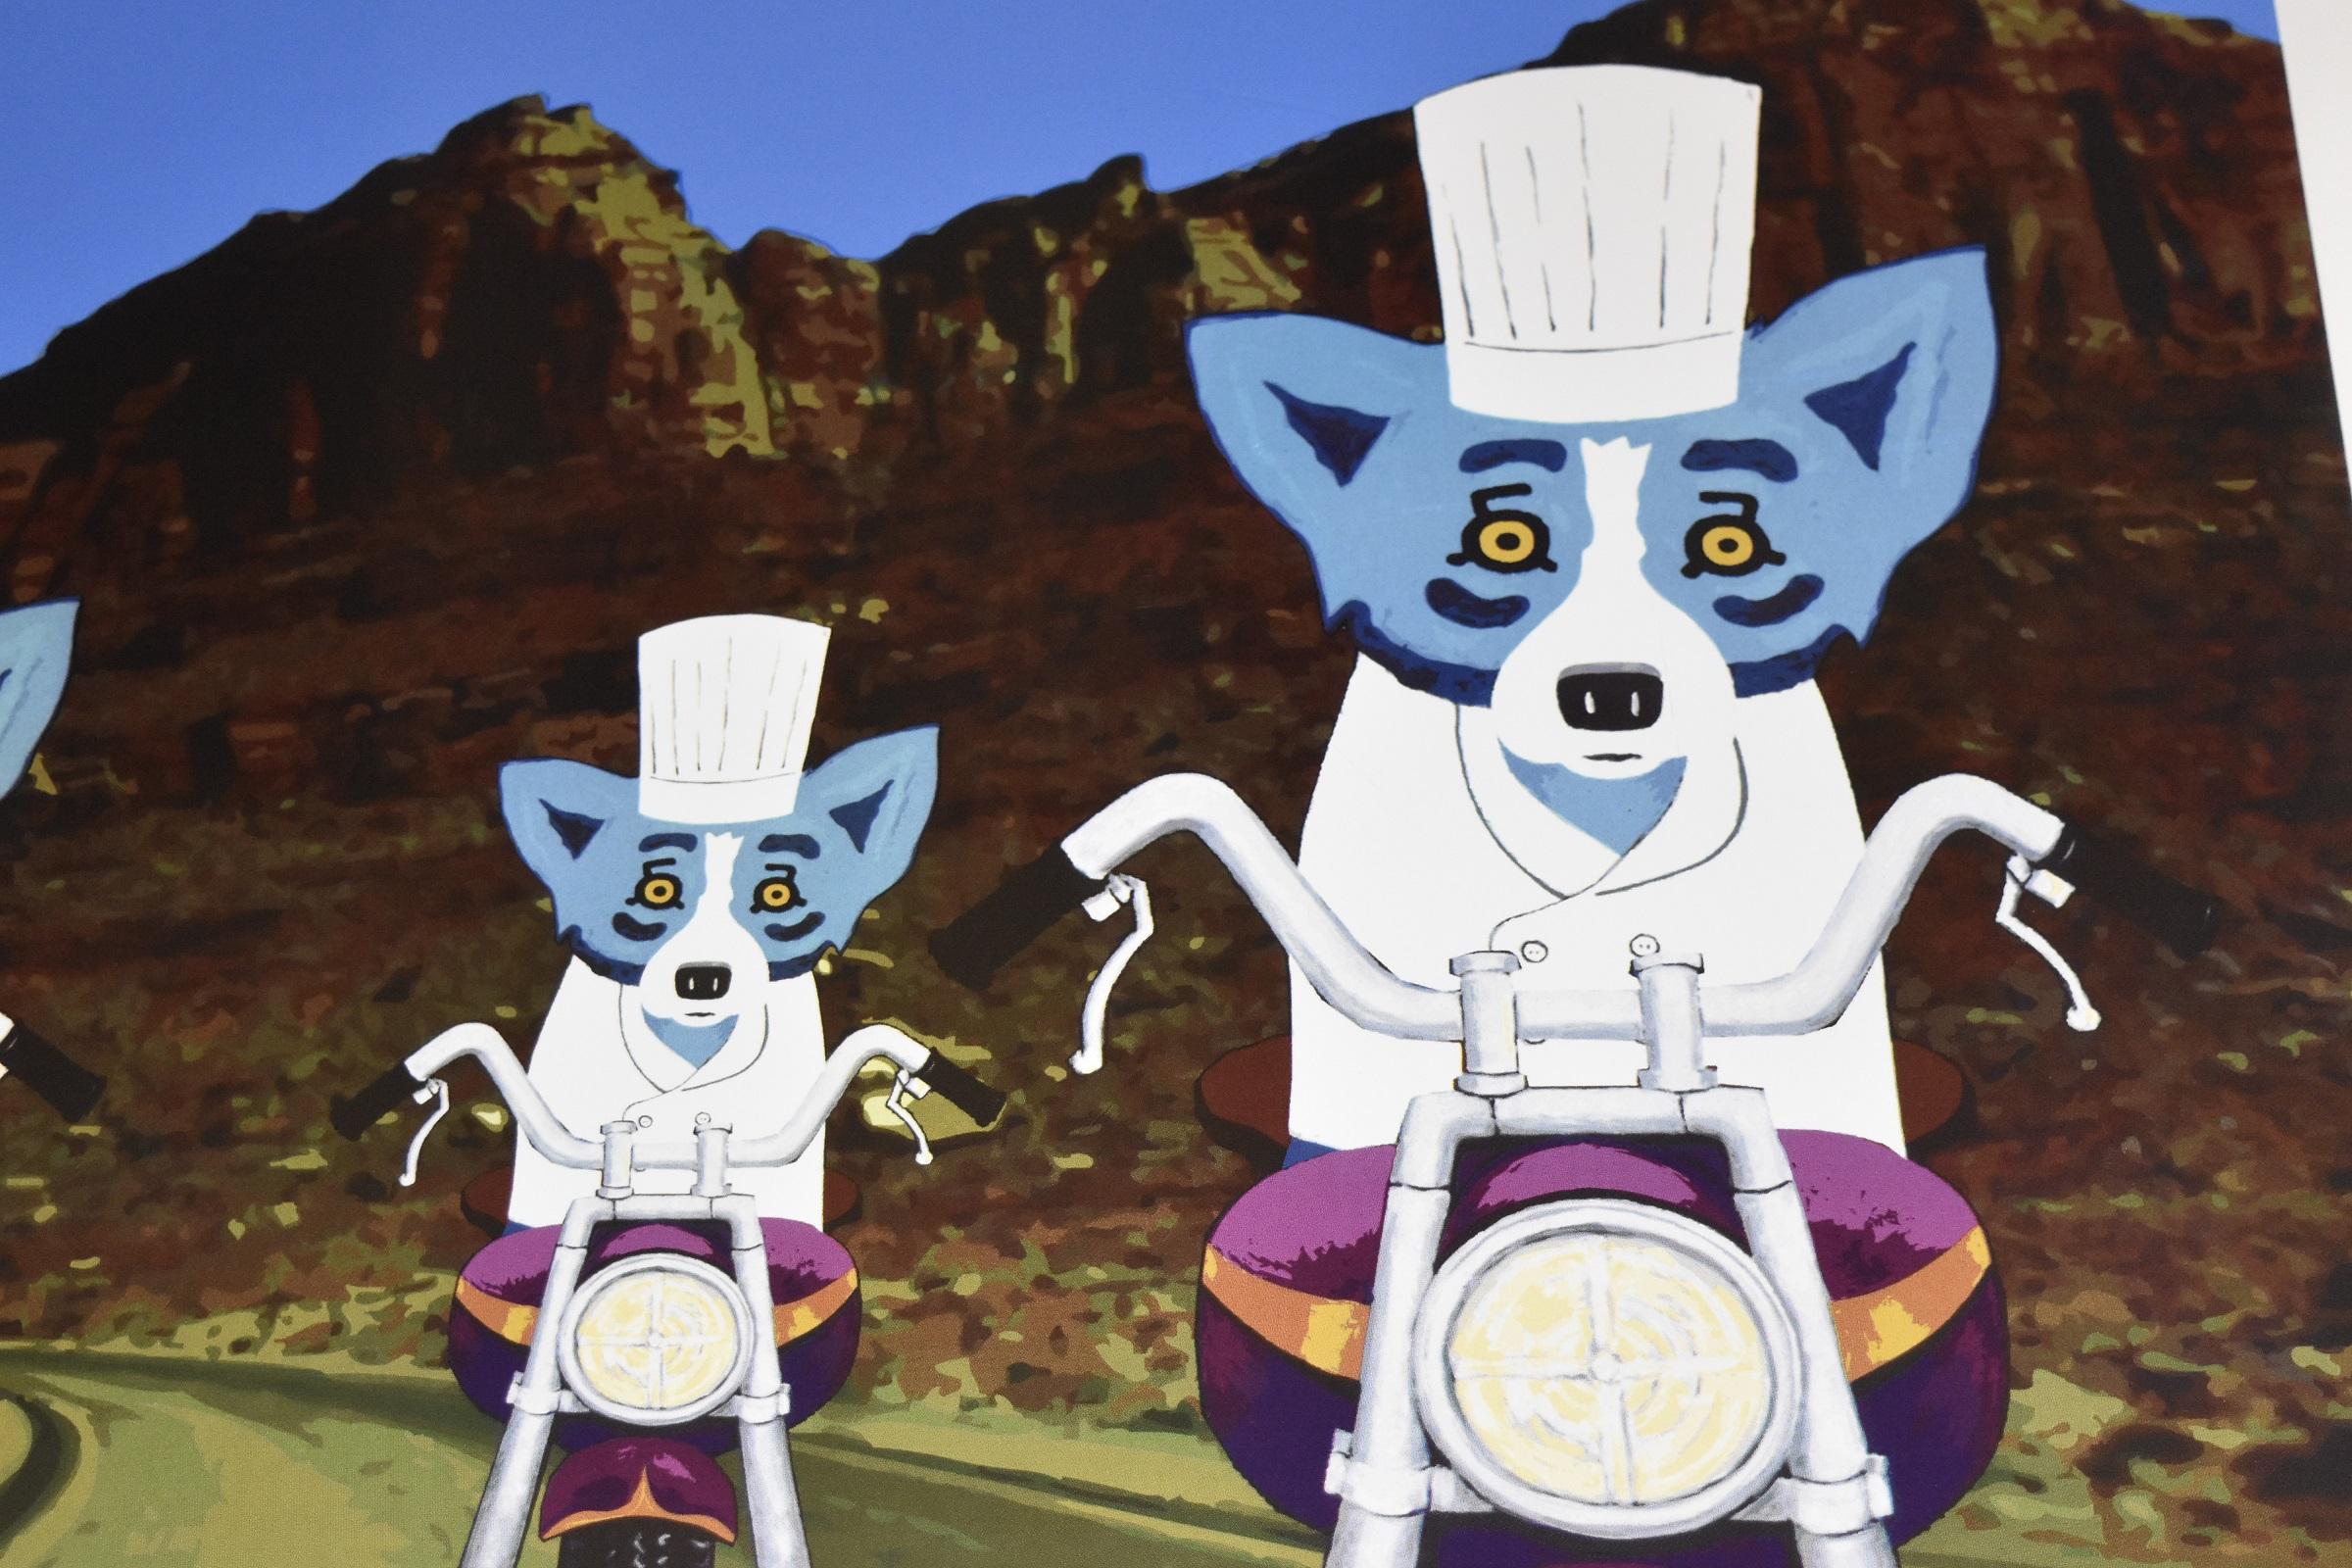 This Blue Dog Work consists of 3 blue dogs riding purple and chrome motorcycles and wearing chef white coats and hats, riding through the mountains of Utah on a beautiful sky blue day. The dogs all show confidence on their ride in their soulful